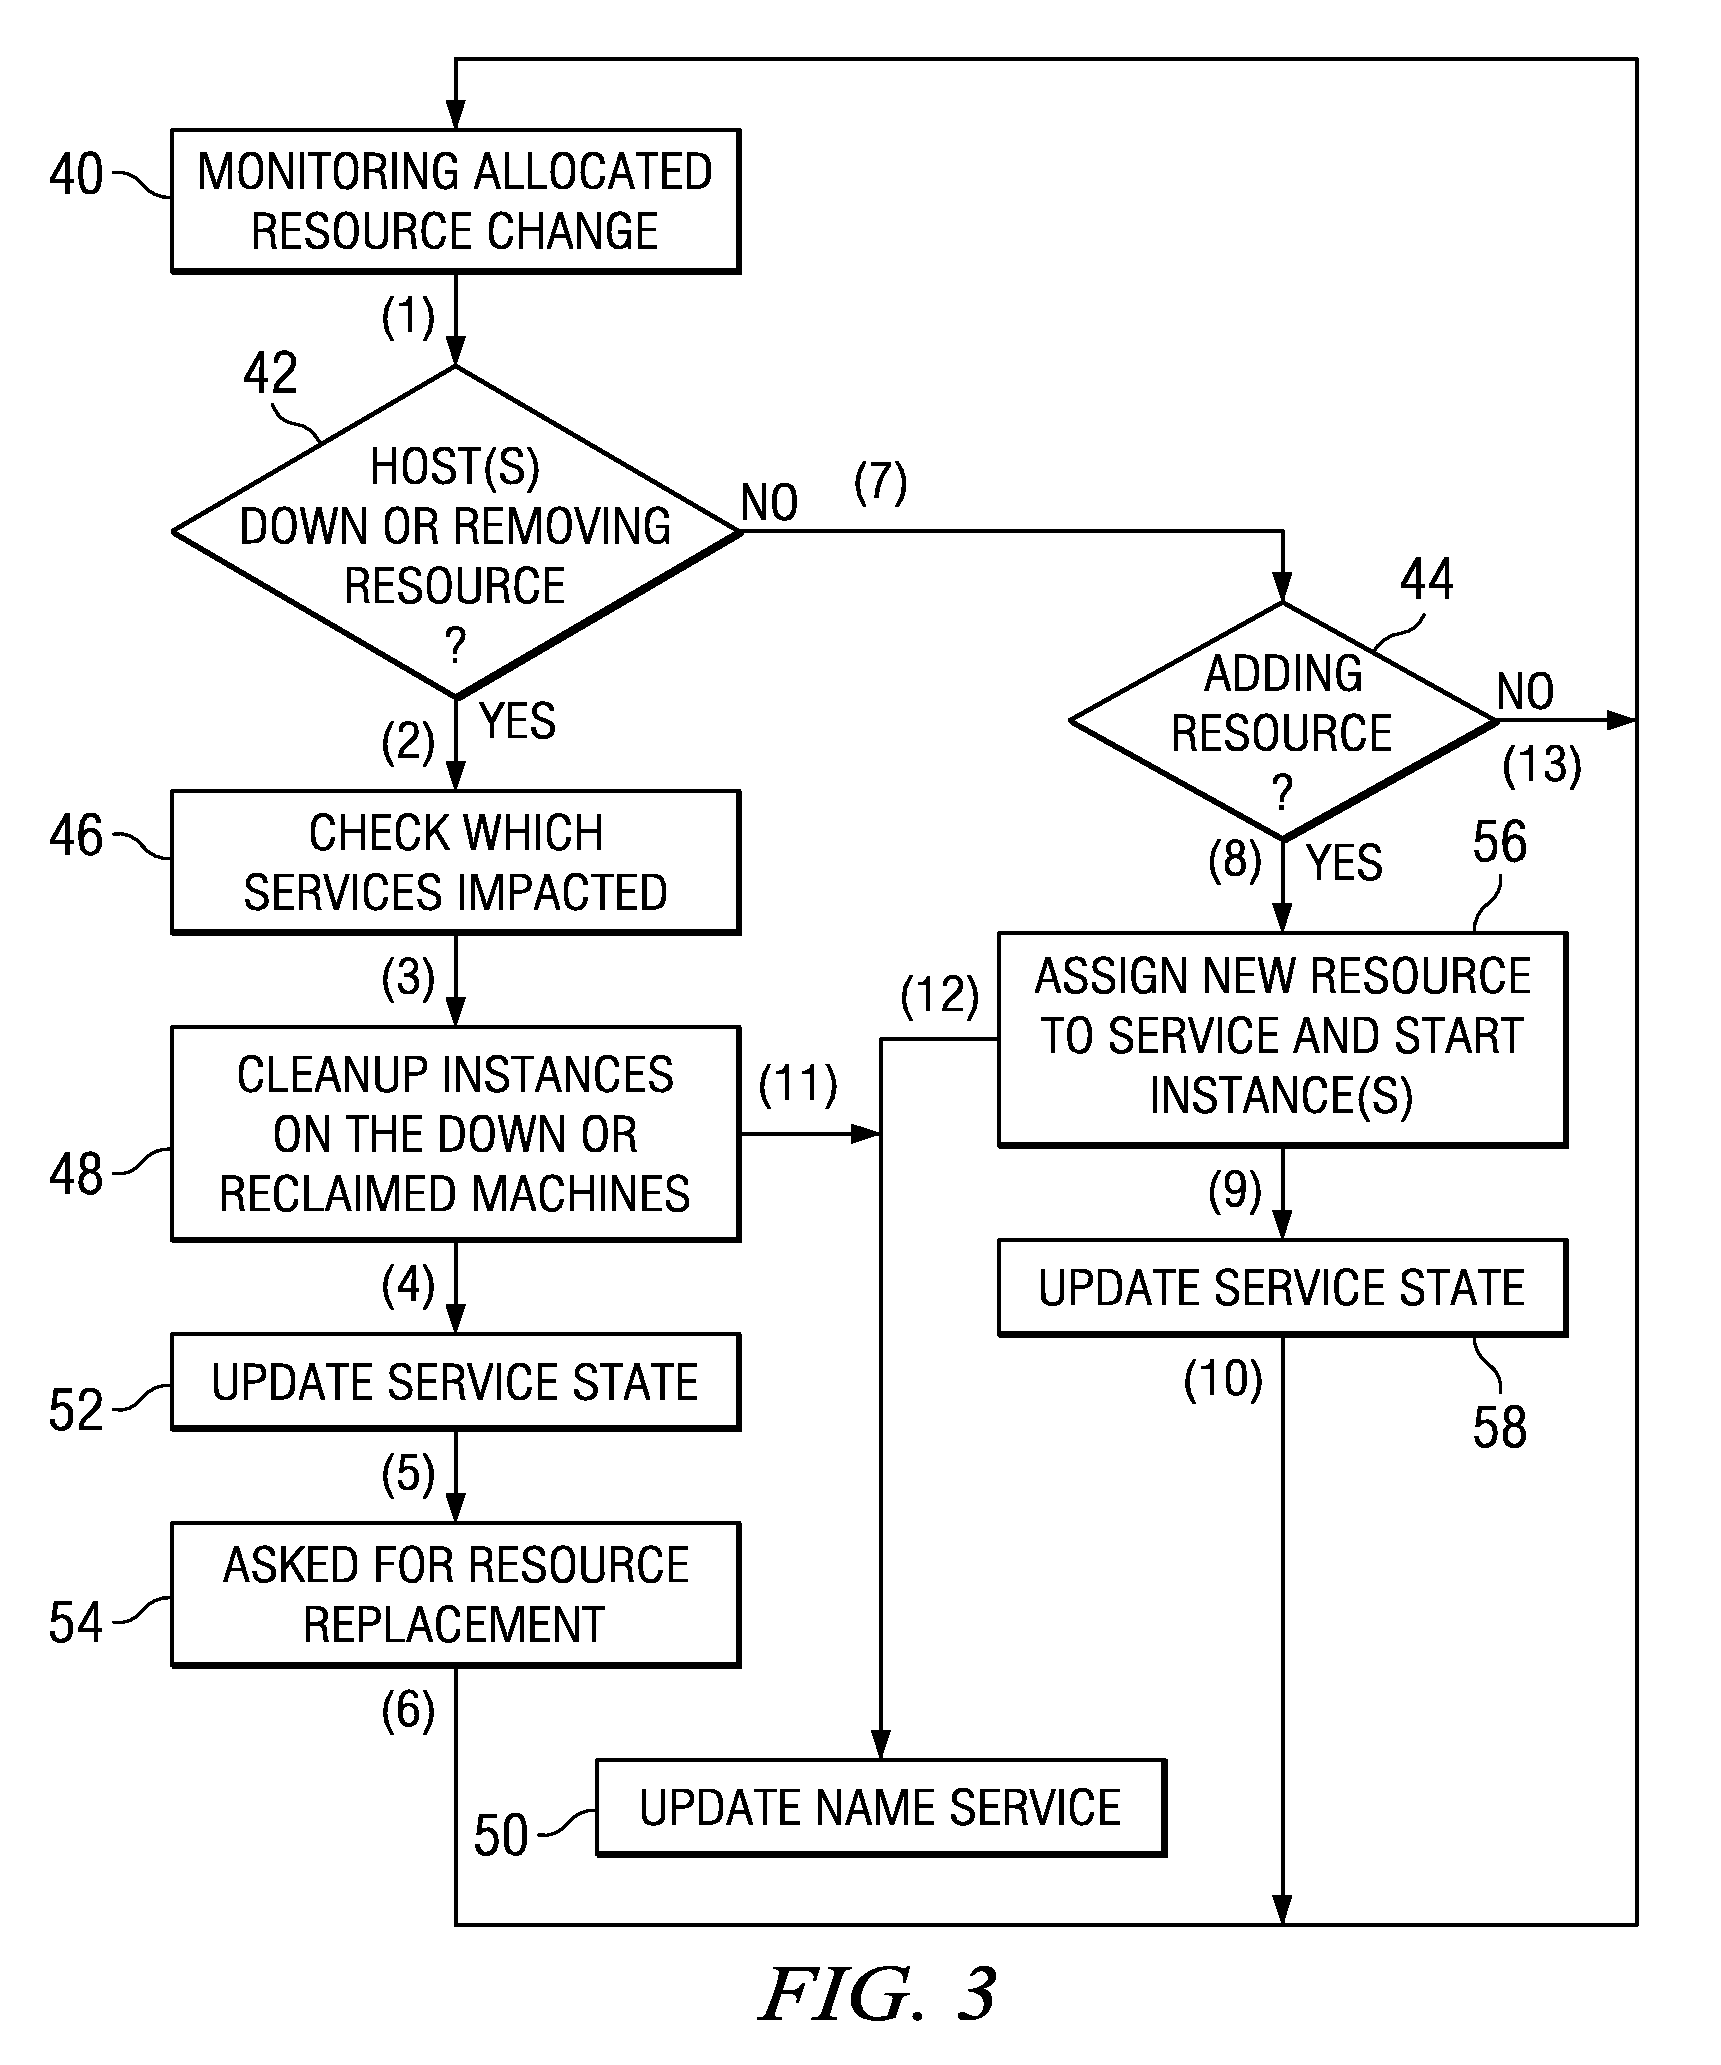 System for generic service management in a distributed and dynamic resource environment, providing constant service access to users